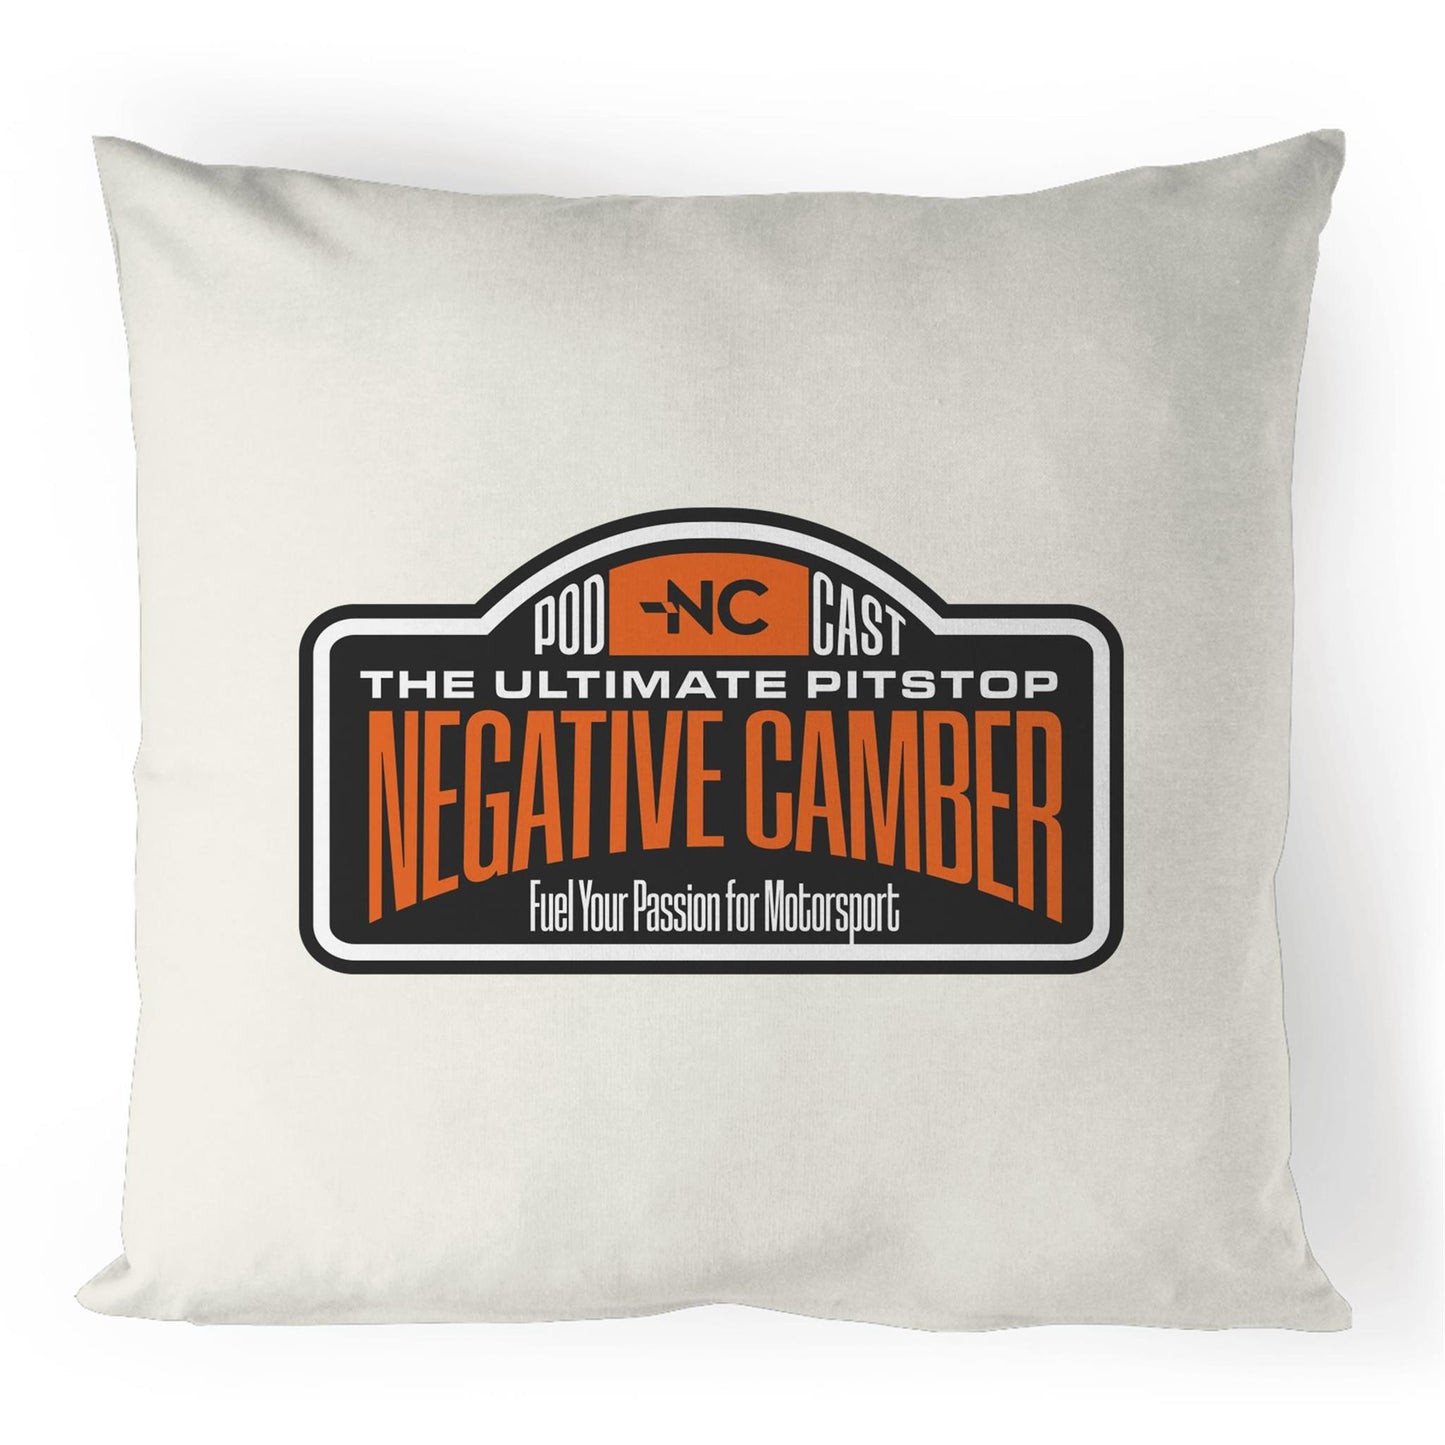 Negative Camber - 100% Linen Cushion Cover